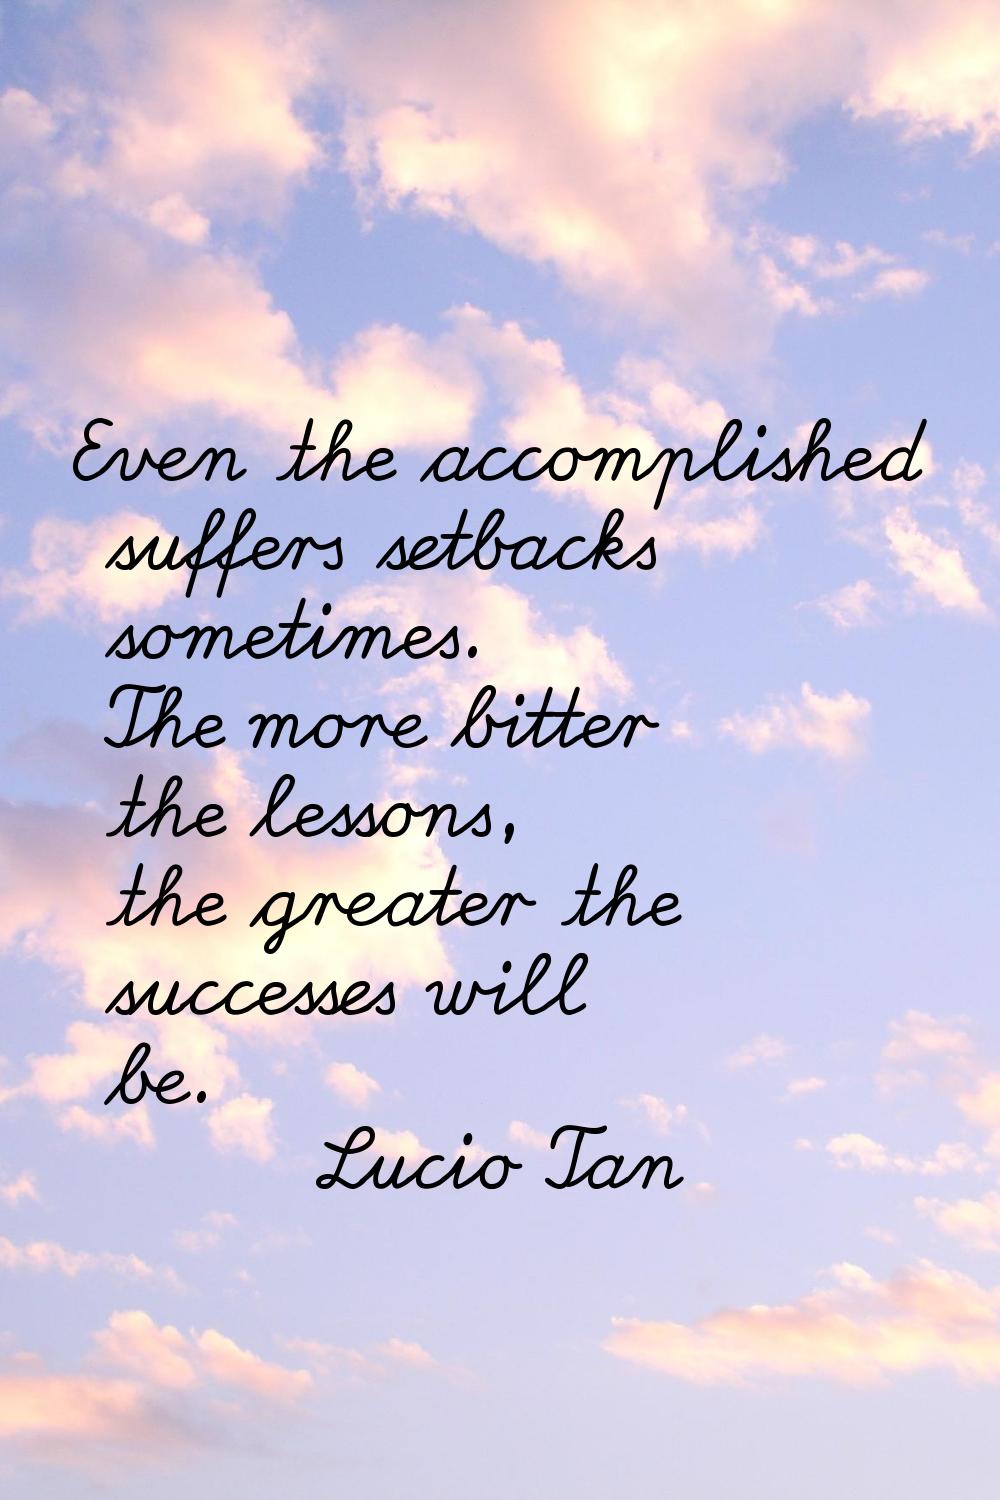 Even the accomplished suffers setbacks sometimes. The more bitter the lessons, the greater the succ